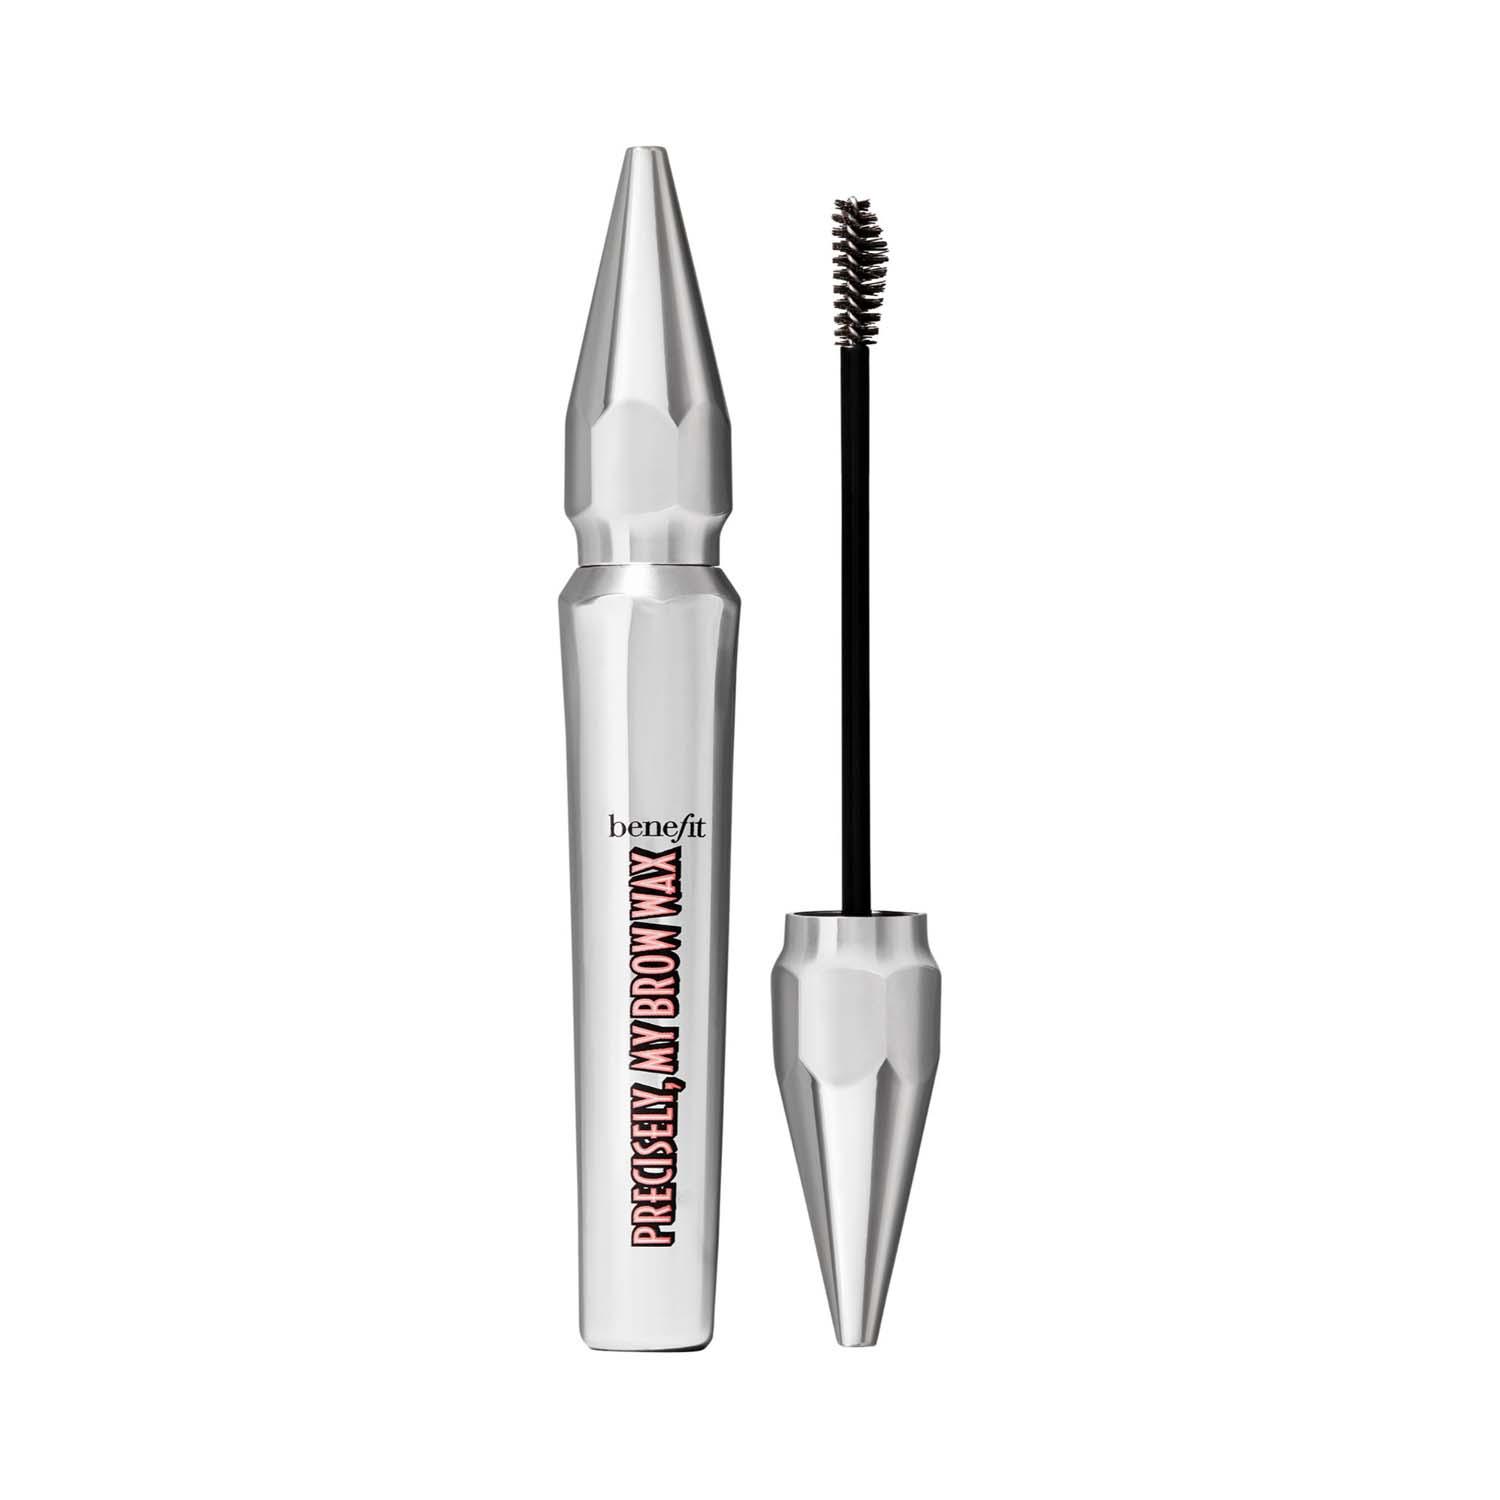 Benefit Cosmetics | Benefit Cosmetics Precisely, My Brow Wax - 3 Warm Light Brown (5 g)